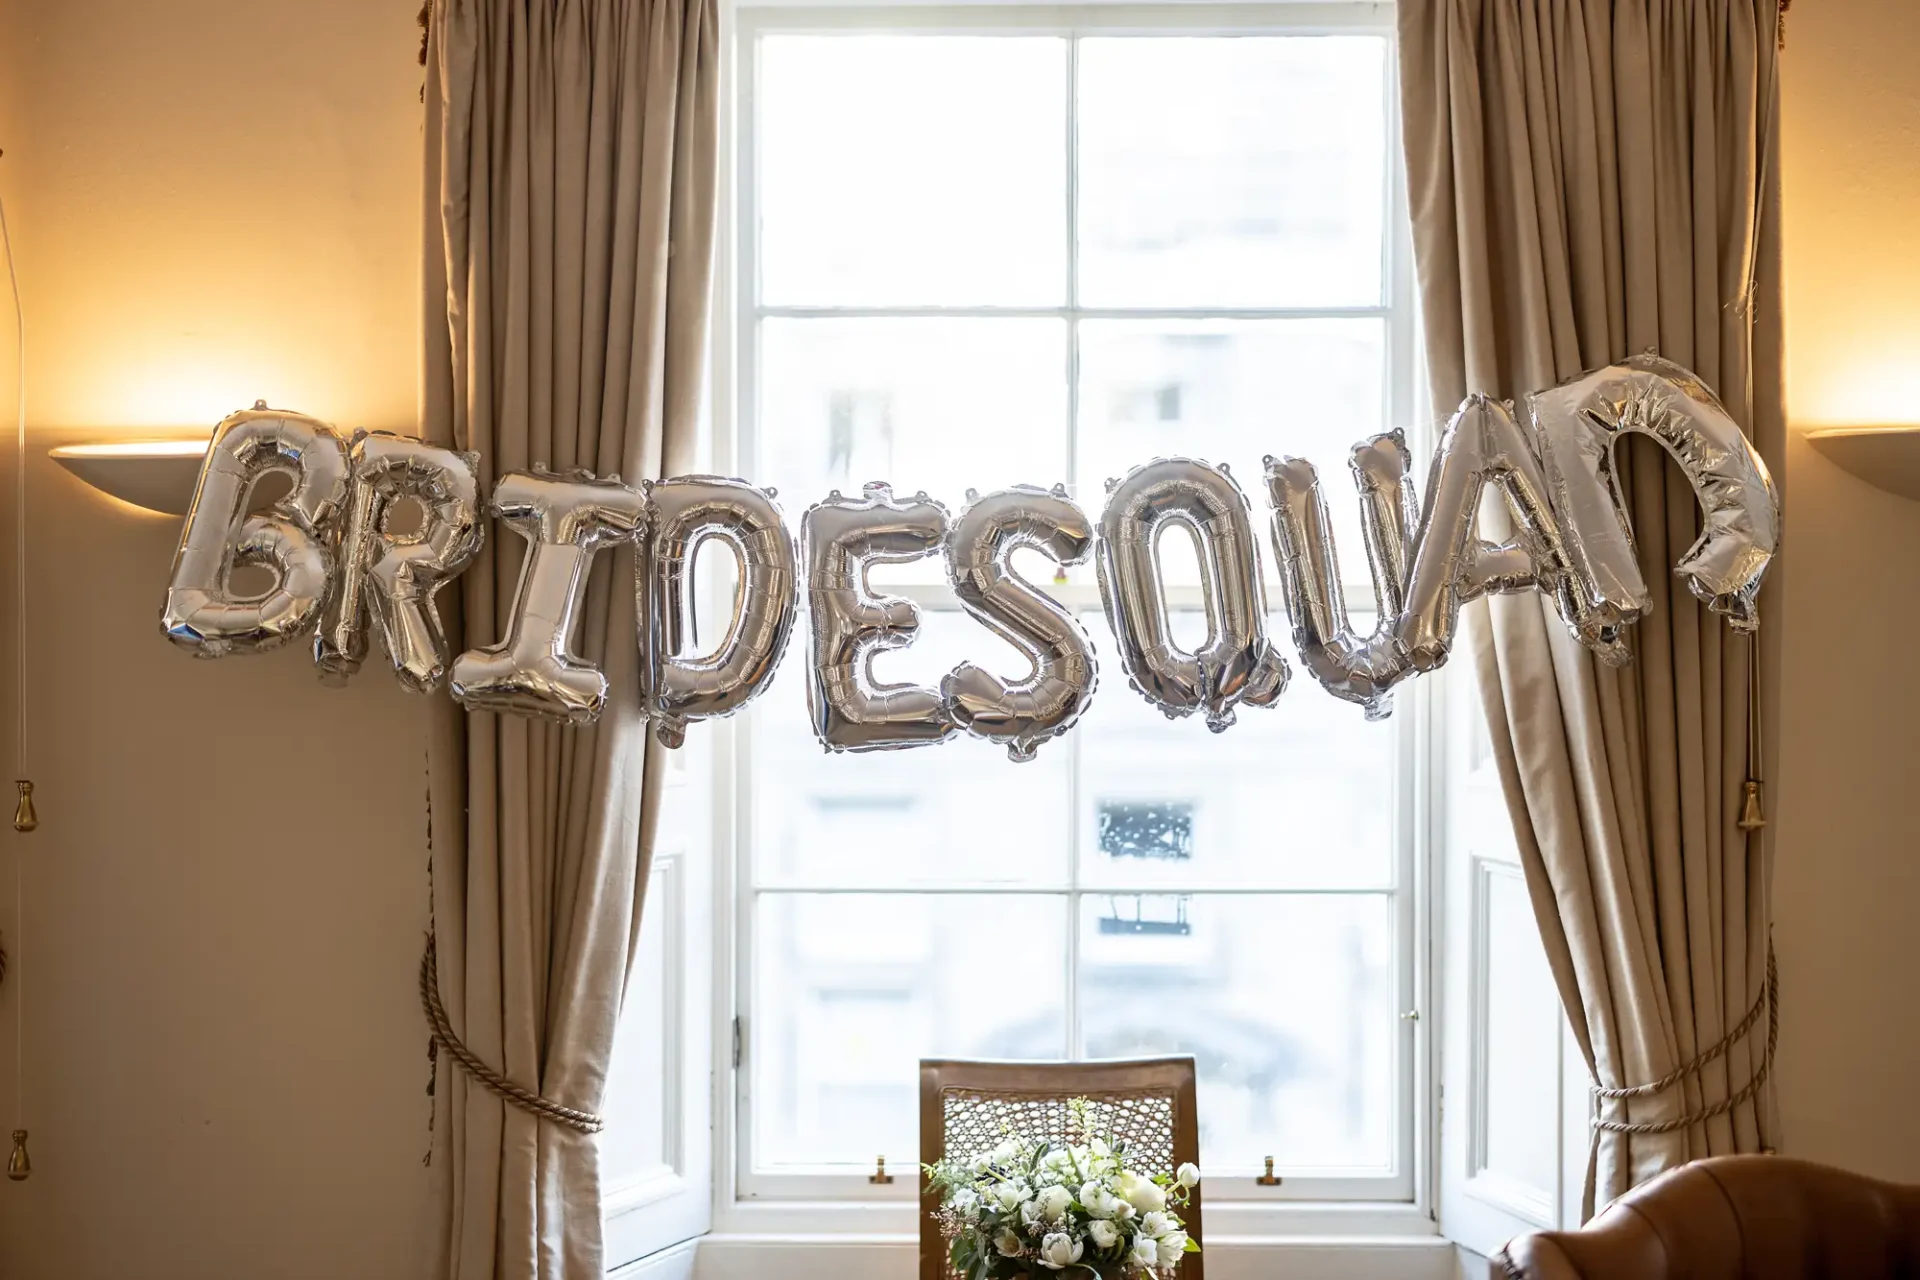 Silver "bride squad" balloon letters hanging in front of a window with curtains in a room with warm lighting.